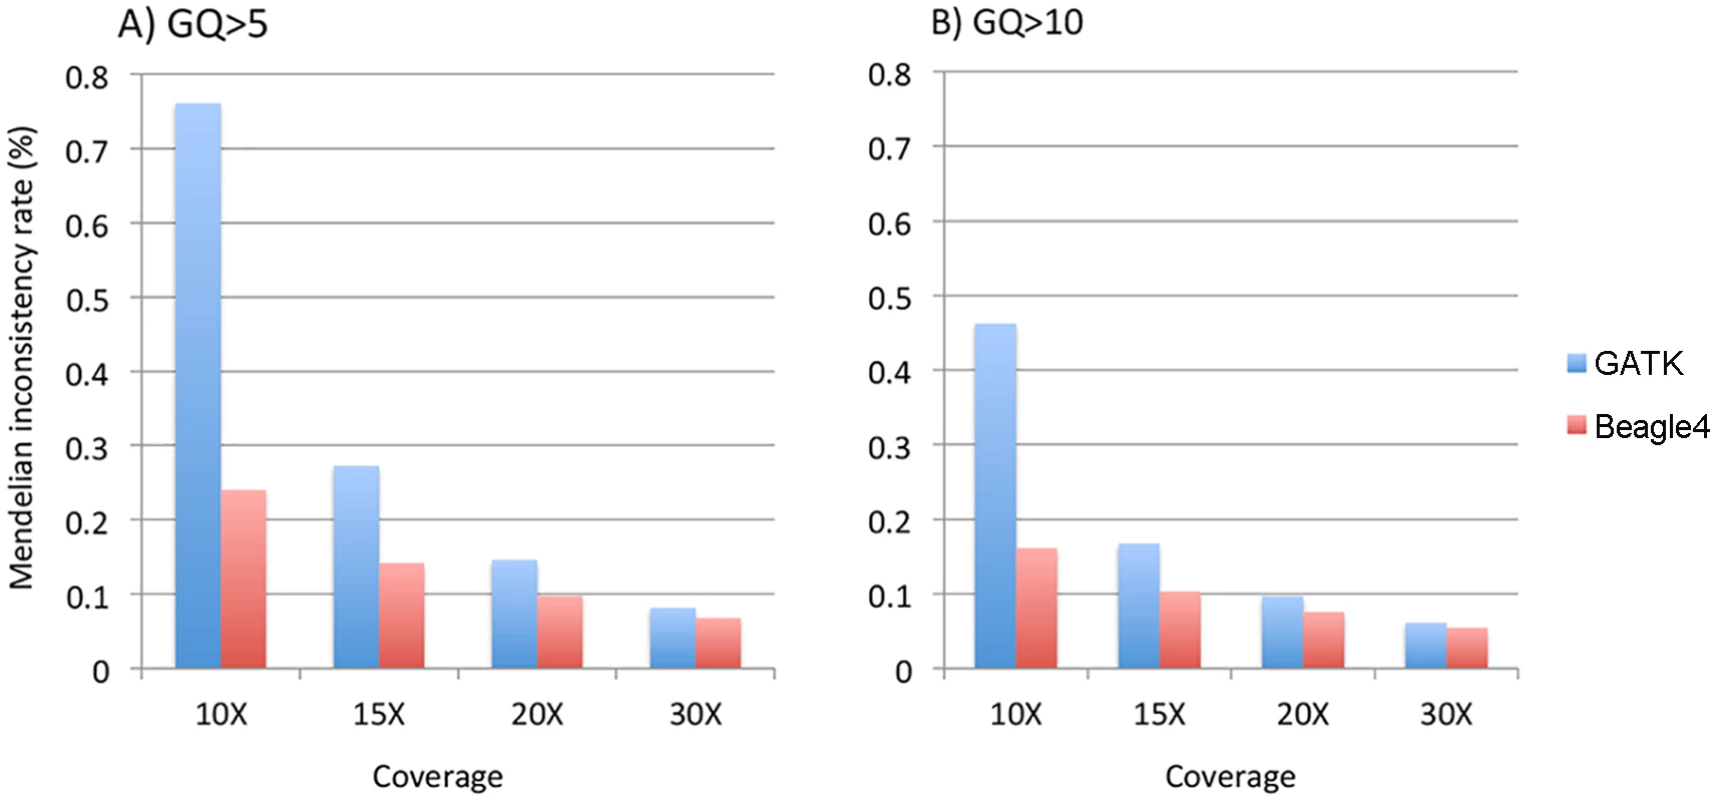 The average Mendelian inconsistency rates of Beagle4 and GATK calls per parents-offspring trio in the Nuc4 pedigrees at sequencing coverage of 10X, 15X, 20X when GQ = 5 (panel A) or GQ = 10 (panel B) was used to filter low quality genotypes.